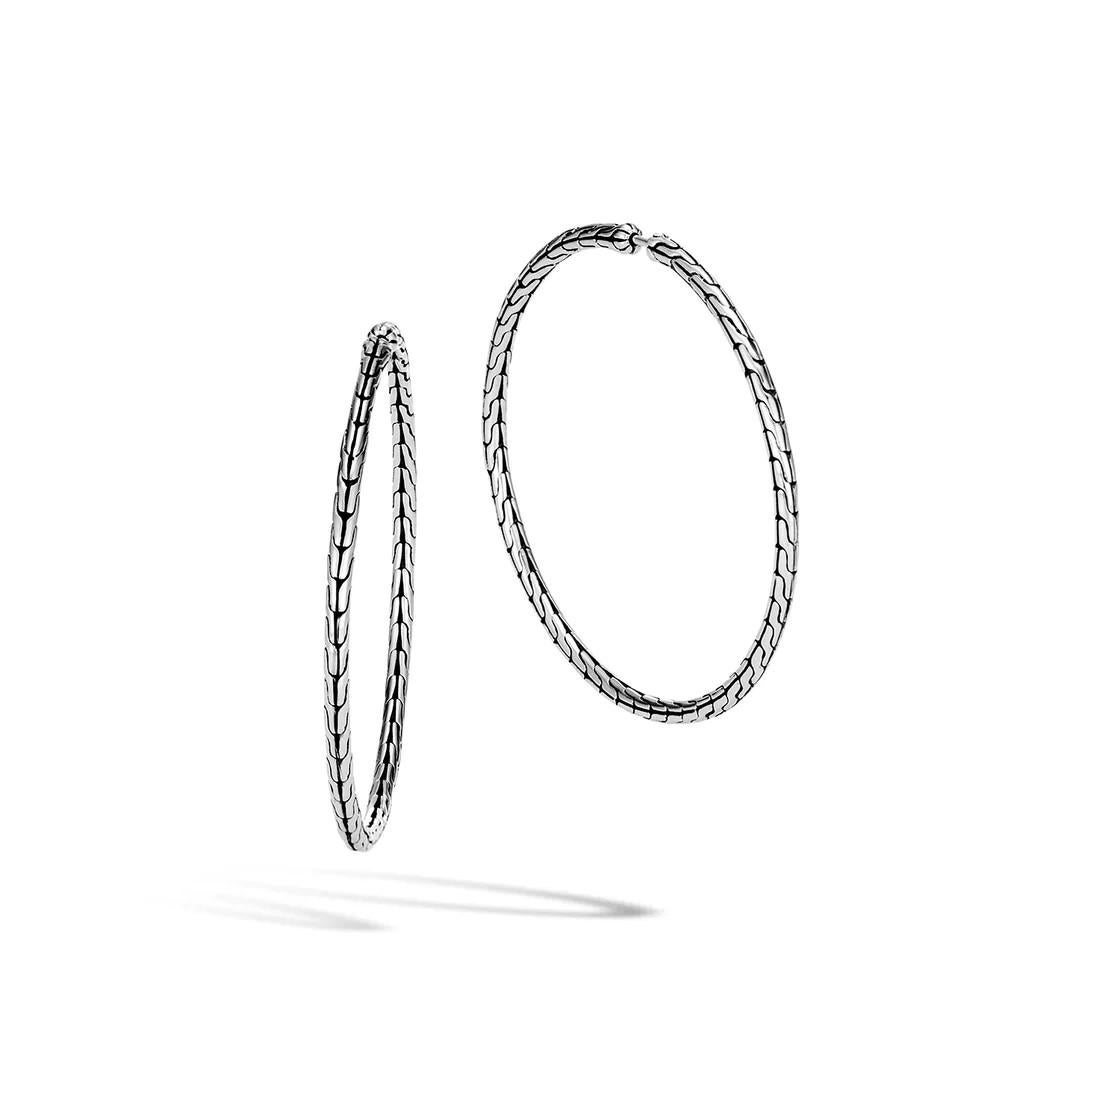 John Hardy craftsmanship radiates from these sterling silver hoop earrings! With a titanium hoop closure and a stunning 71.5MM x 71.5MM size, these earrings will make a statement wherever you go!

John Hardy
Sterling Silver Hoop Earrings
Metal: